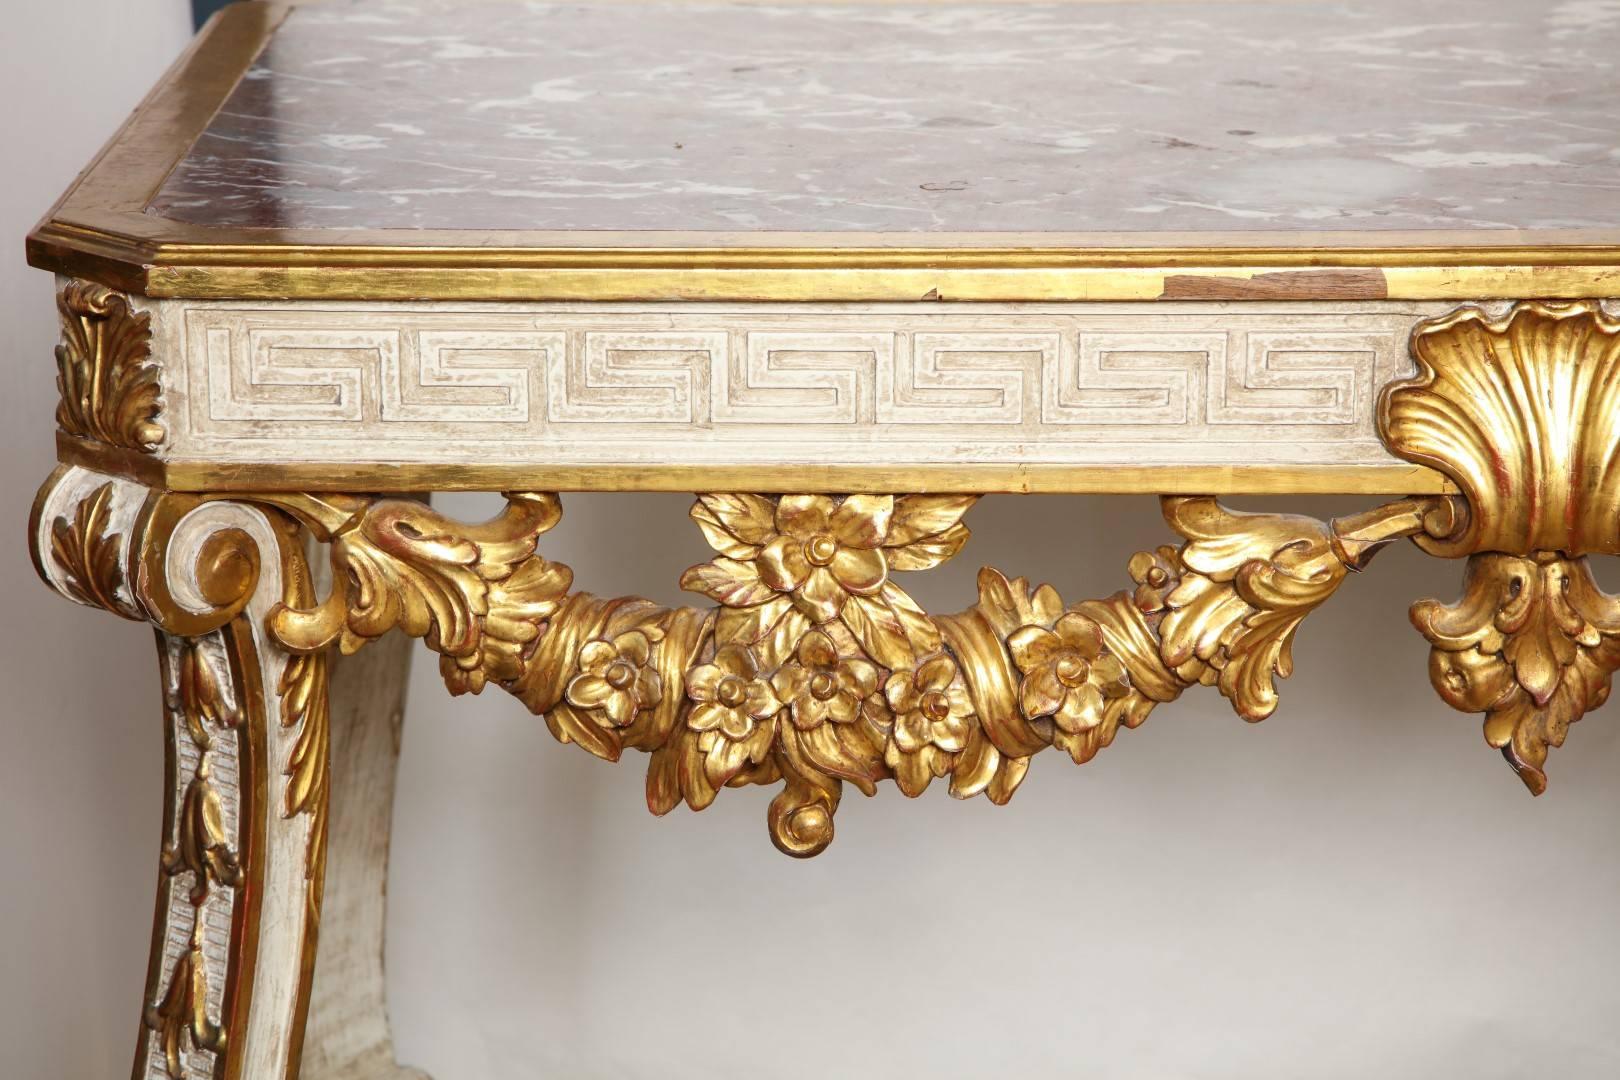 Swedish George II Style Parcel-Gilt Cream Painted Console Table